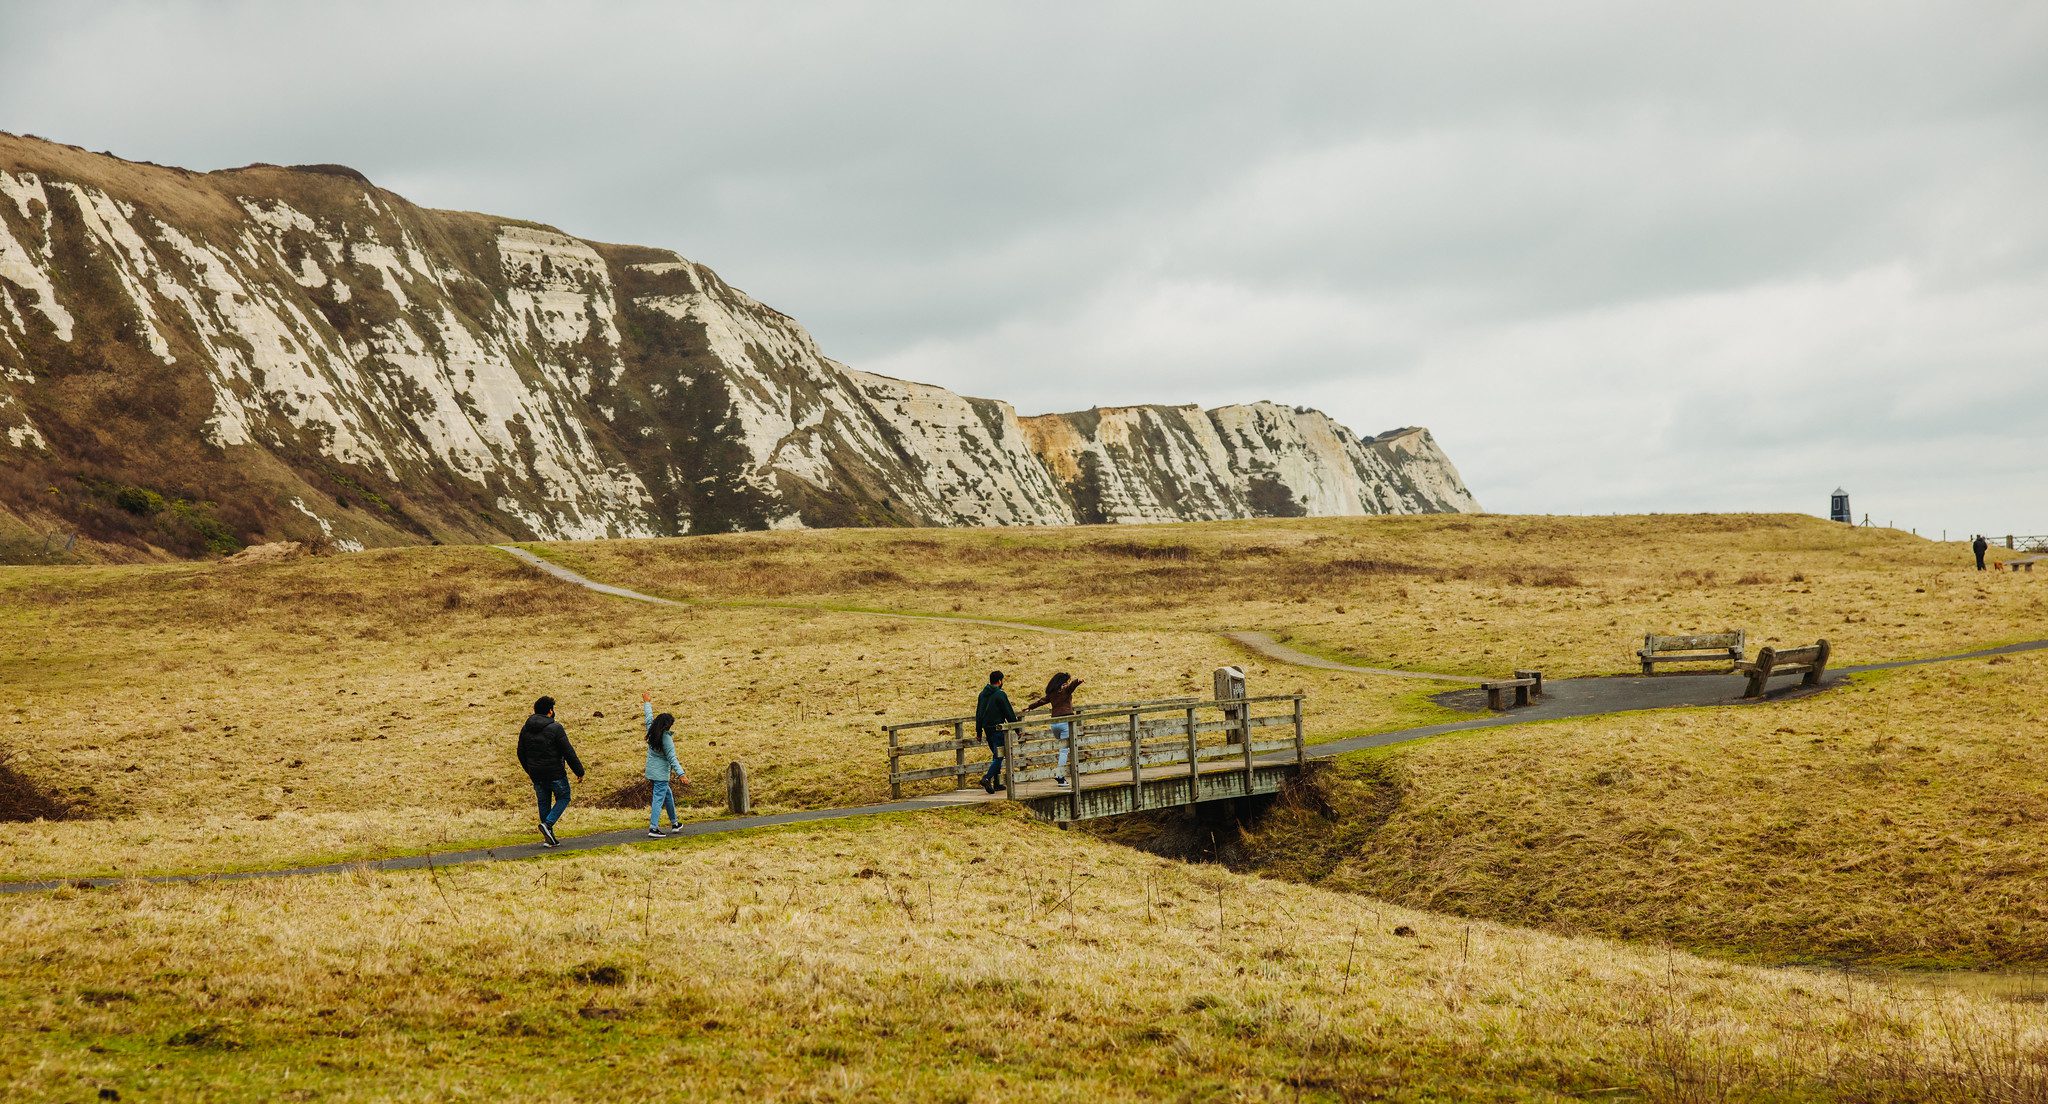 Group of people walking along a footpath beneath the White Cliffs of Dover